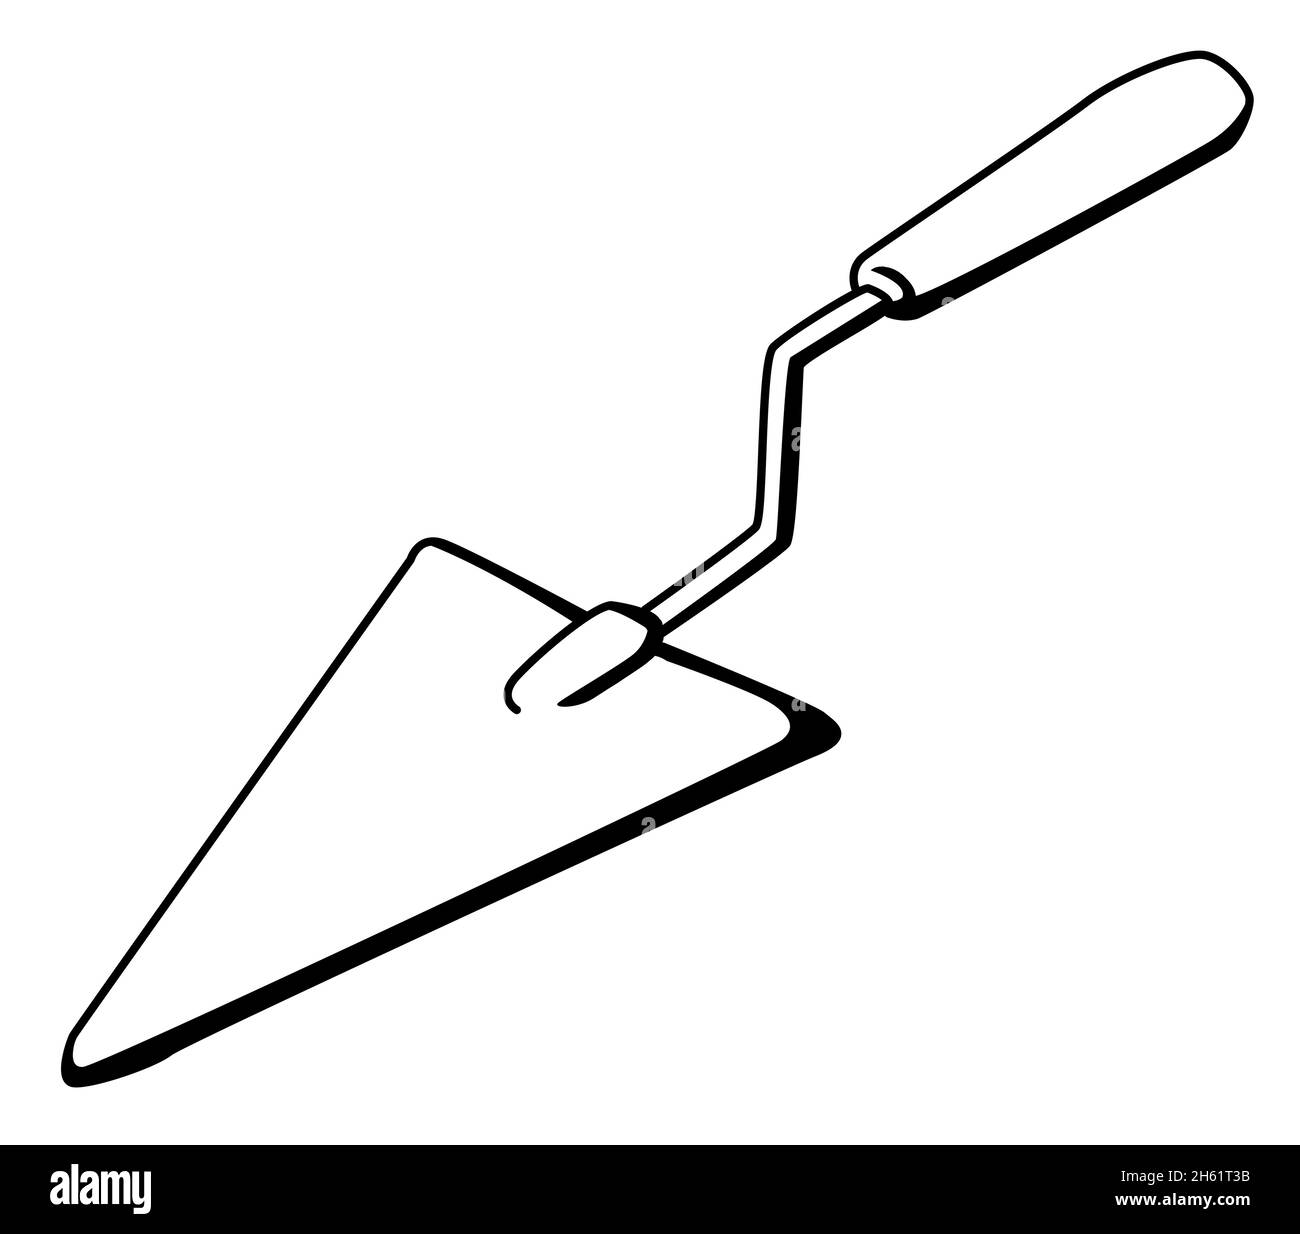 Trowel tool object cartoon line drawing, vector, horizontal, black and white, isolated Stock Vector